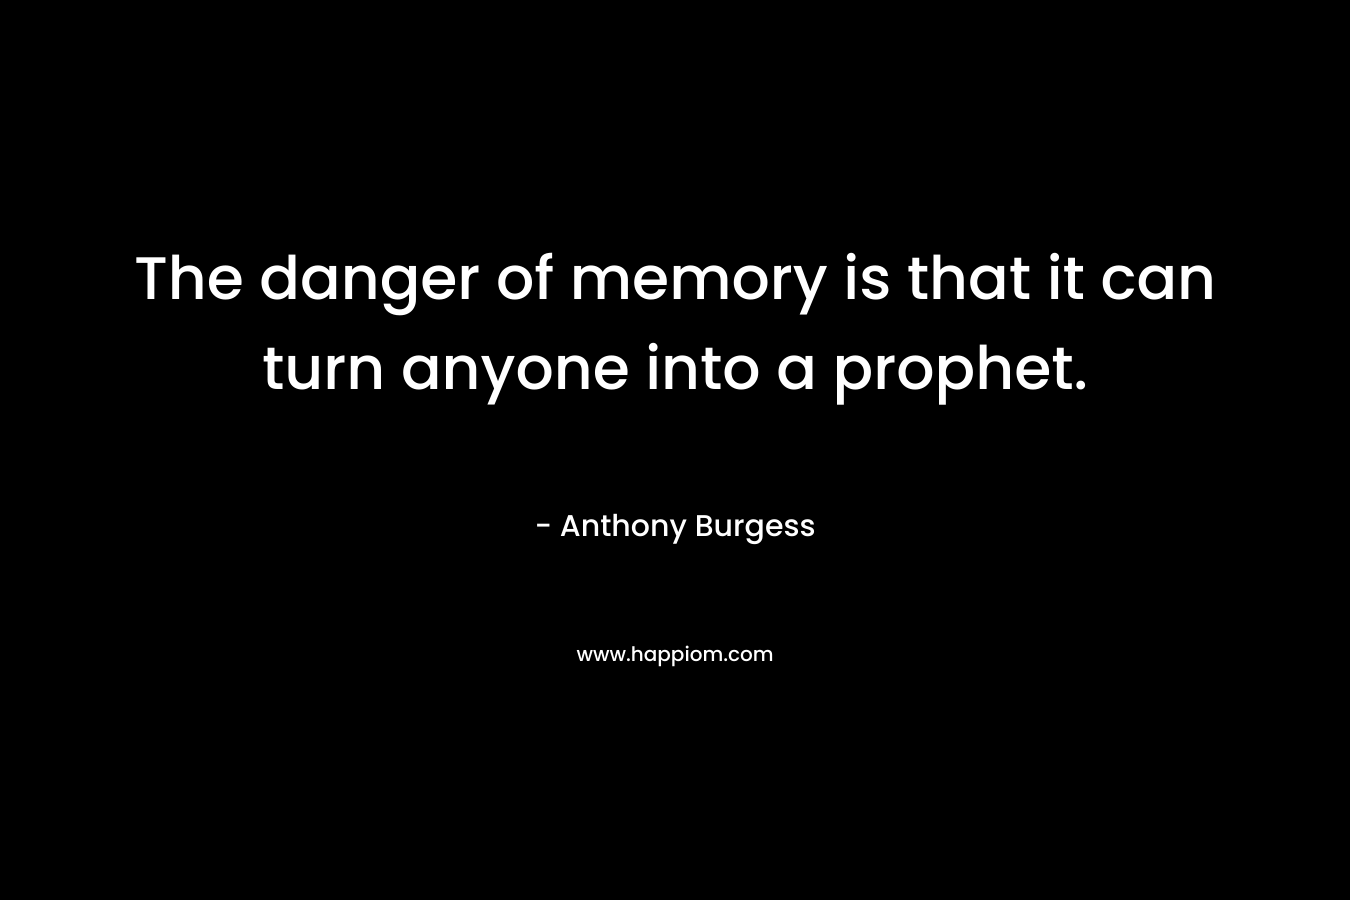 The danger of memory is that it can turn anyone into a prophet.